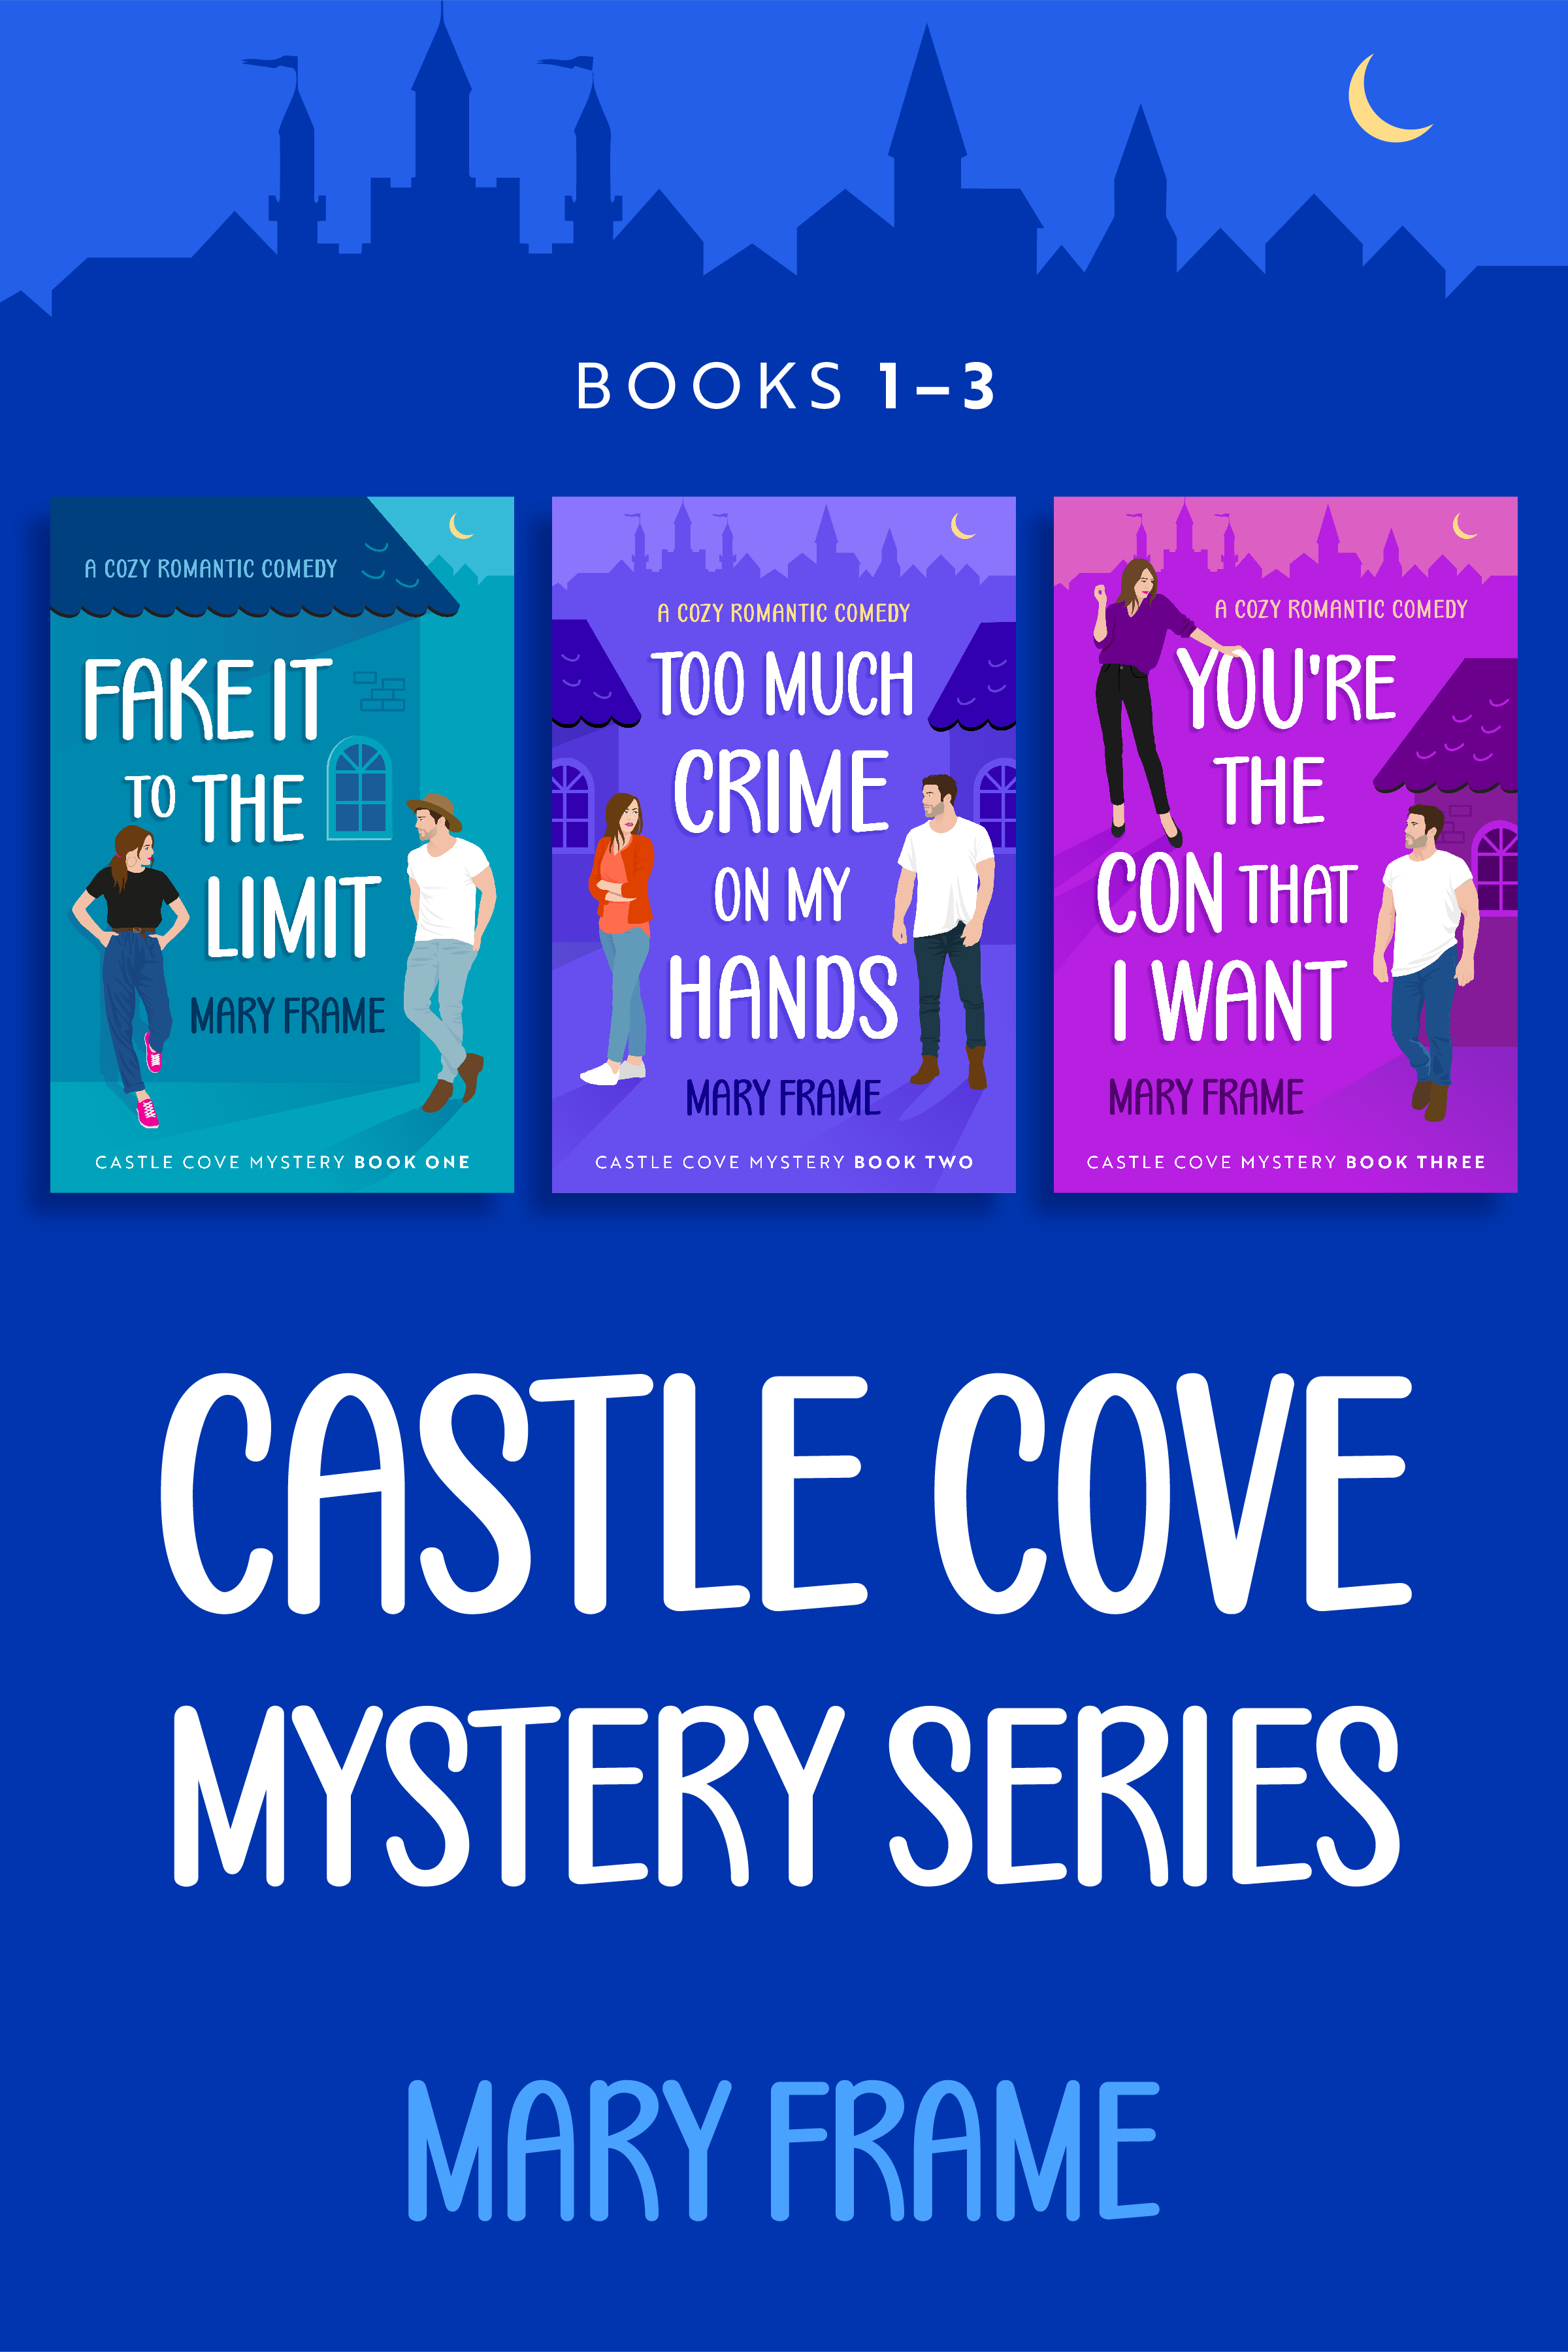 Castle Cove Mystery series COVER